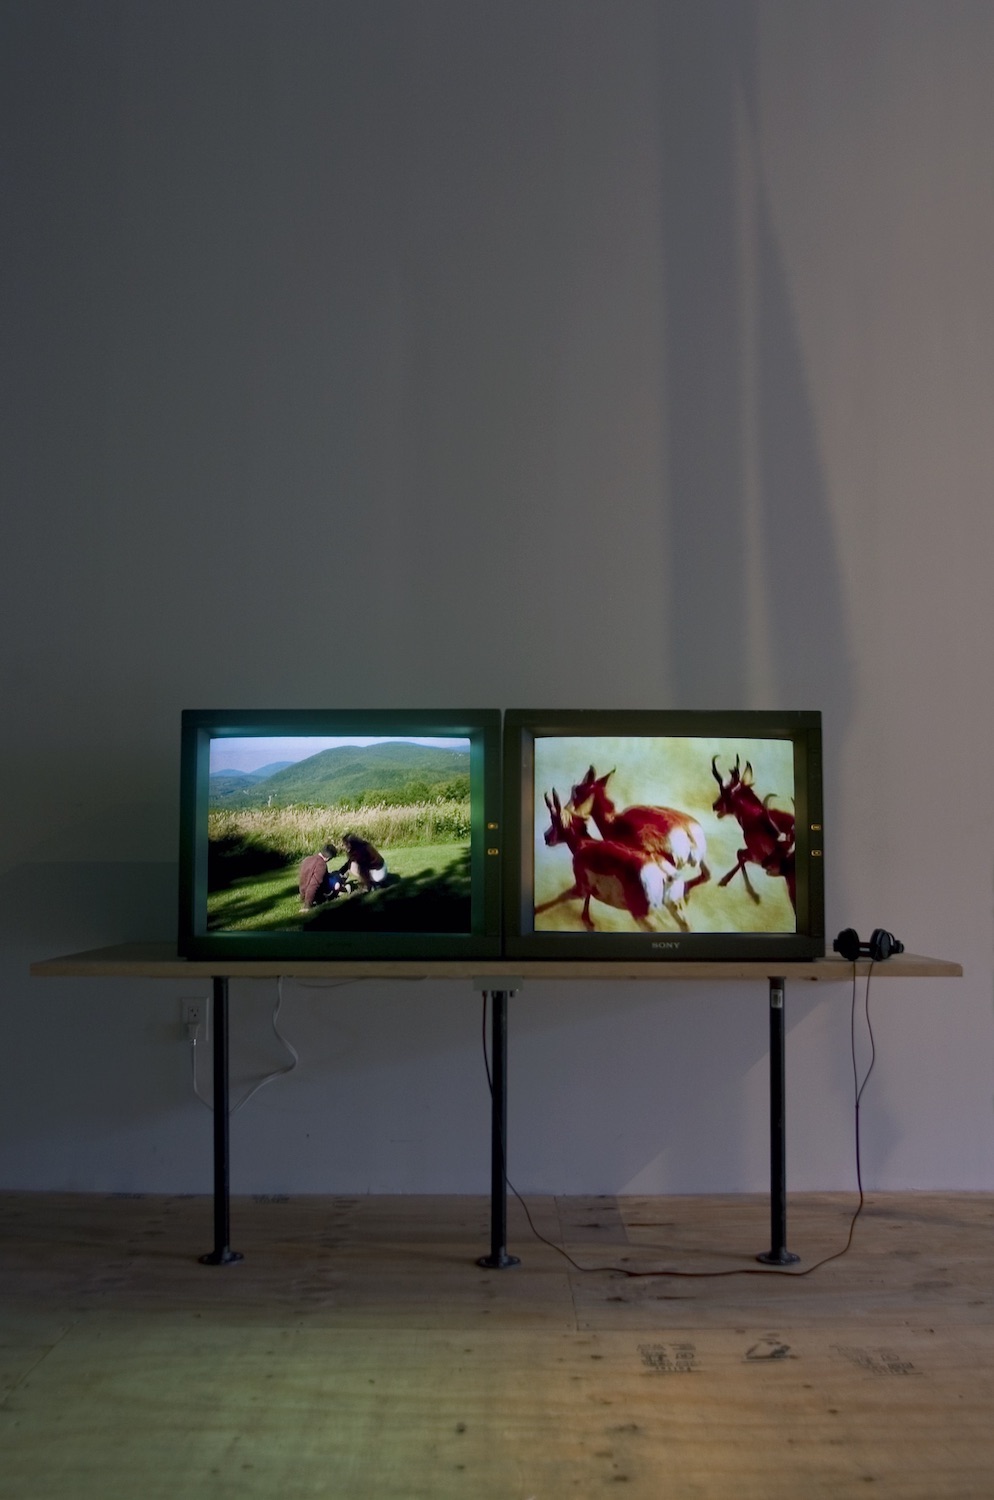 Laura Parnas, *Untitled (for Technically Sweet)*, 2008. Two channel video installation, 2:30 minutes